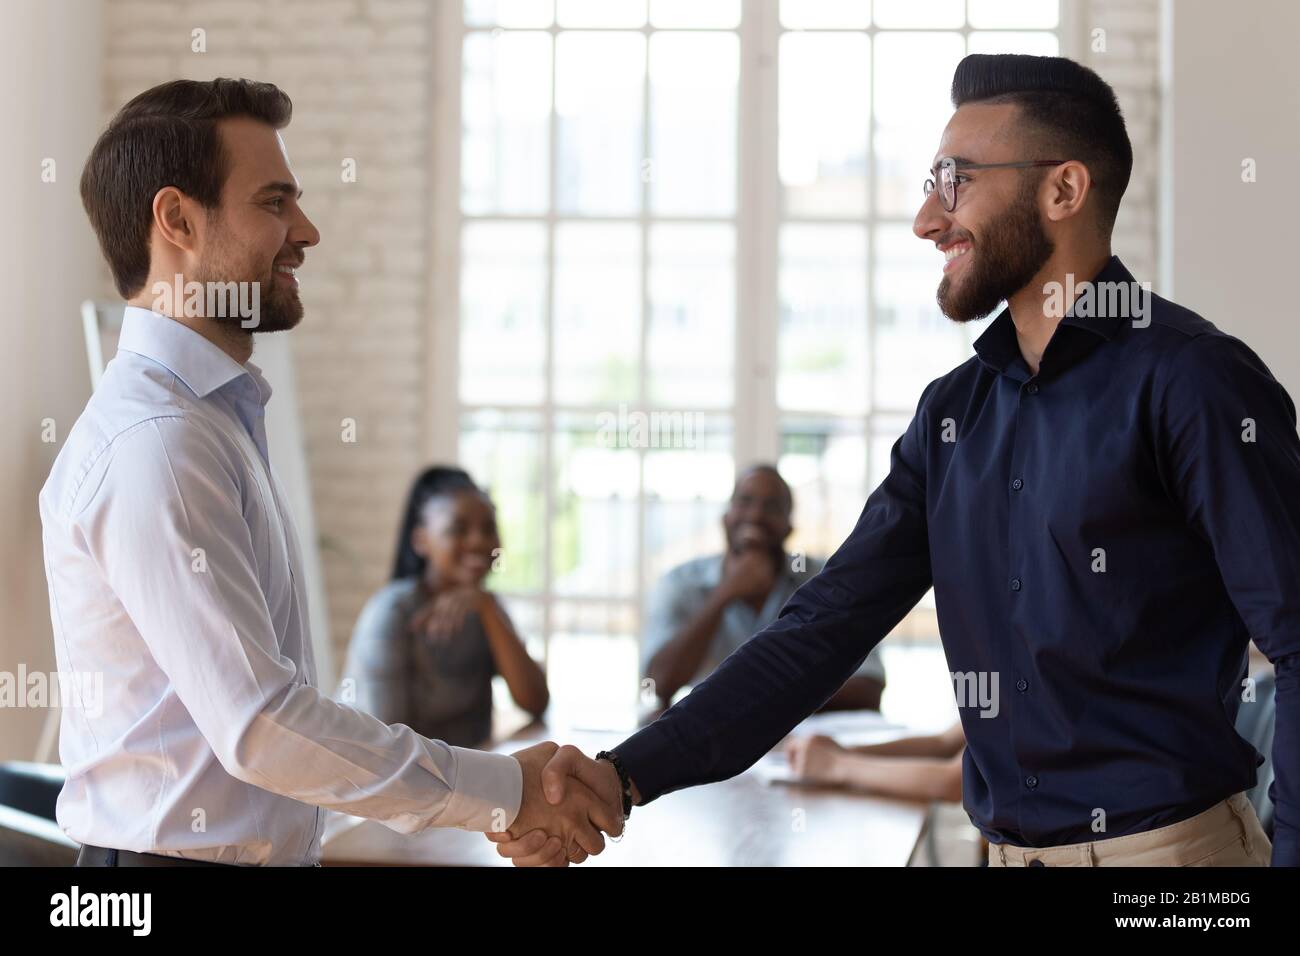 Caucasian and middle eastern ethnicity businessman handshaking greeting each other Stock Photo